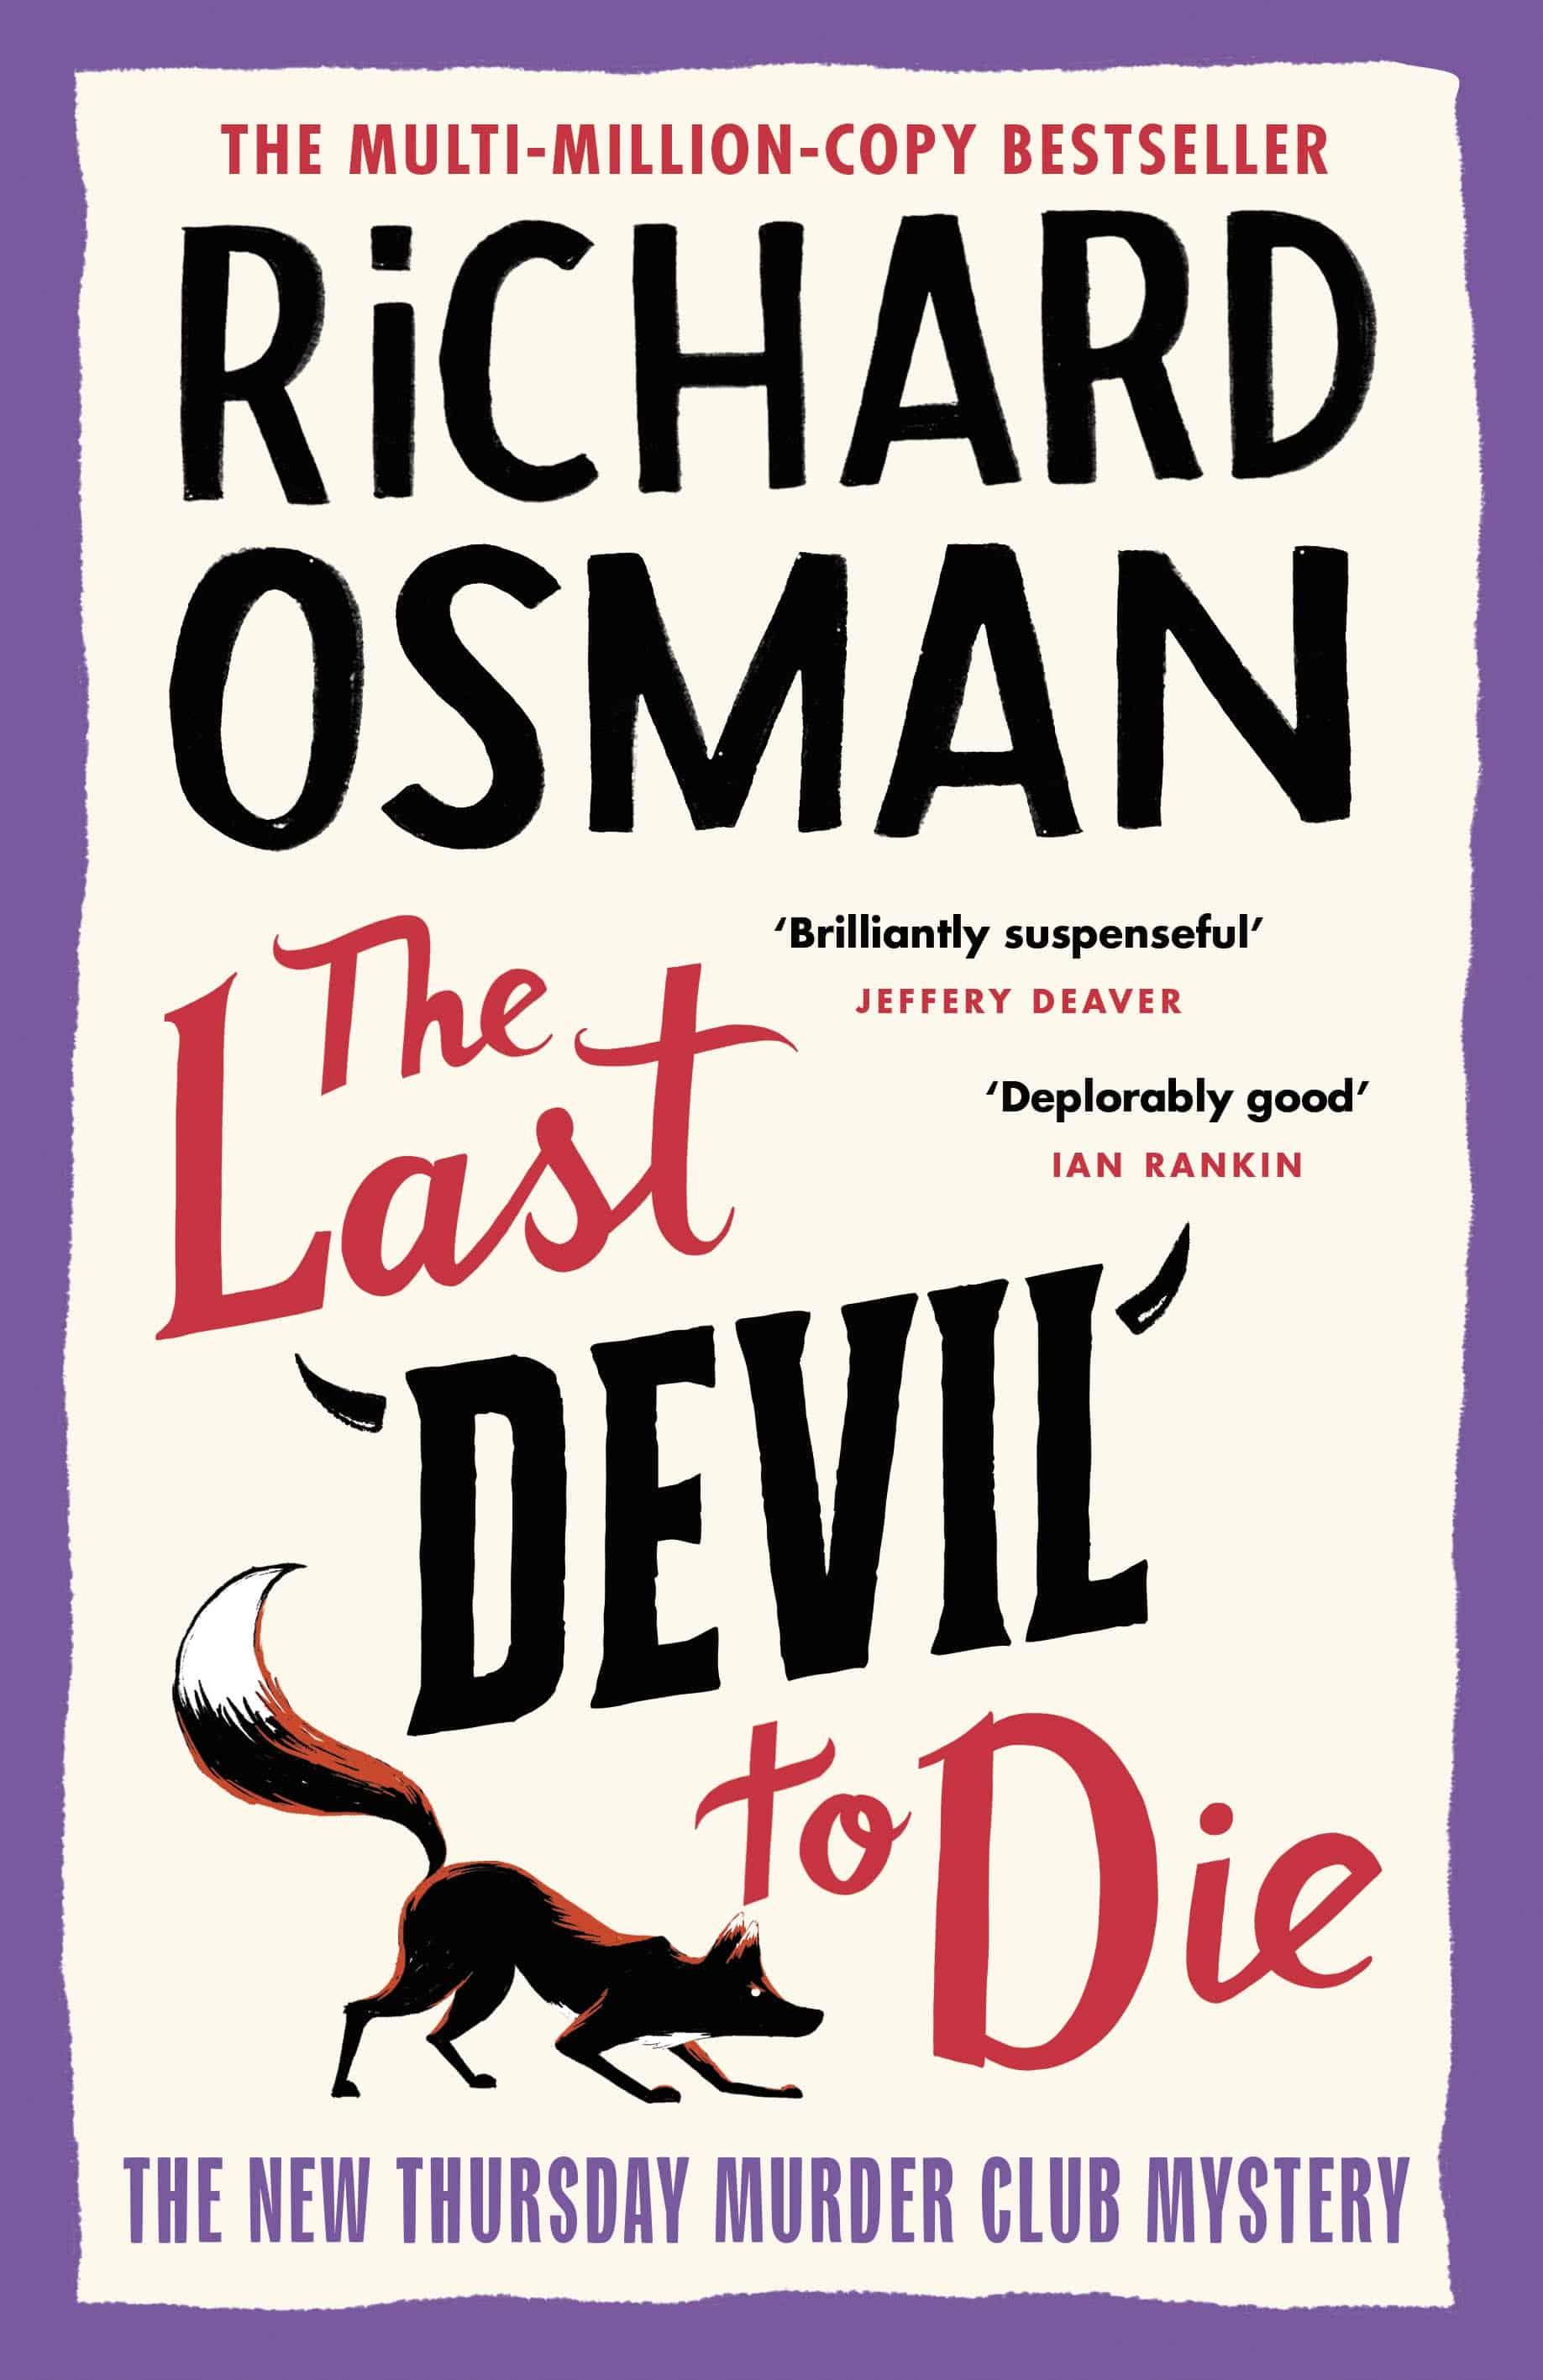 Book cover of The Last Devil to Die by Richard Osman - book 4 in the Thursday Murder Club series